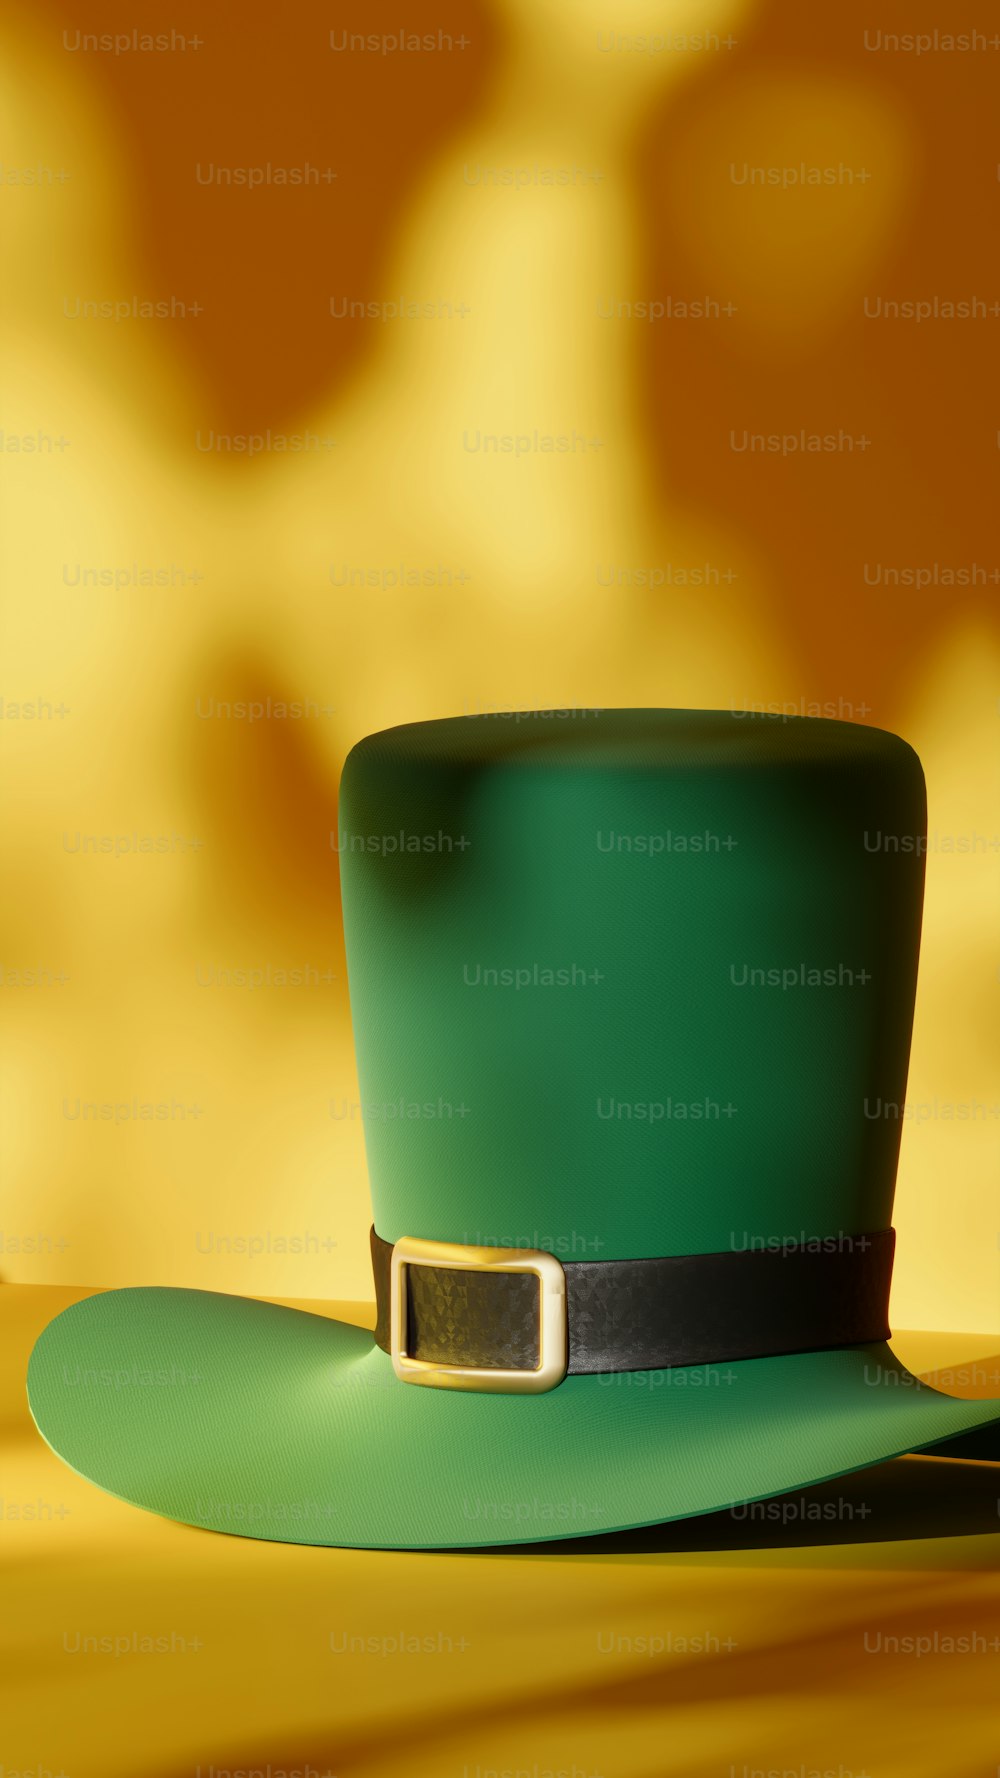 a green hat sitting on top of a table